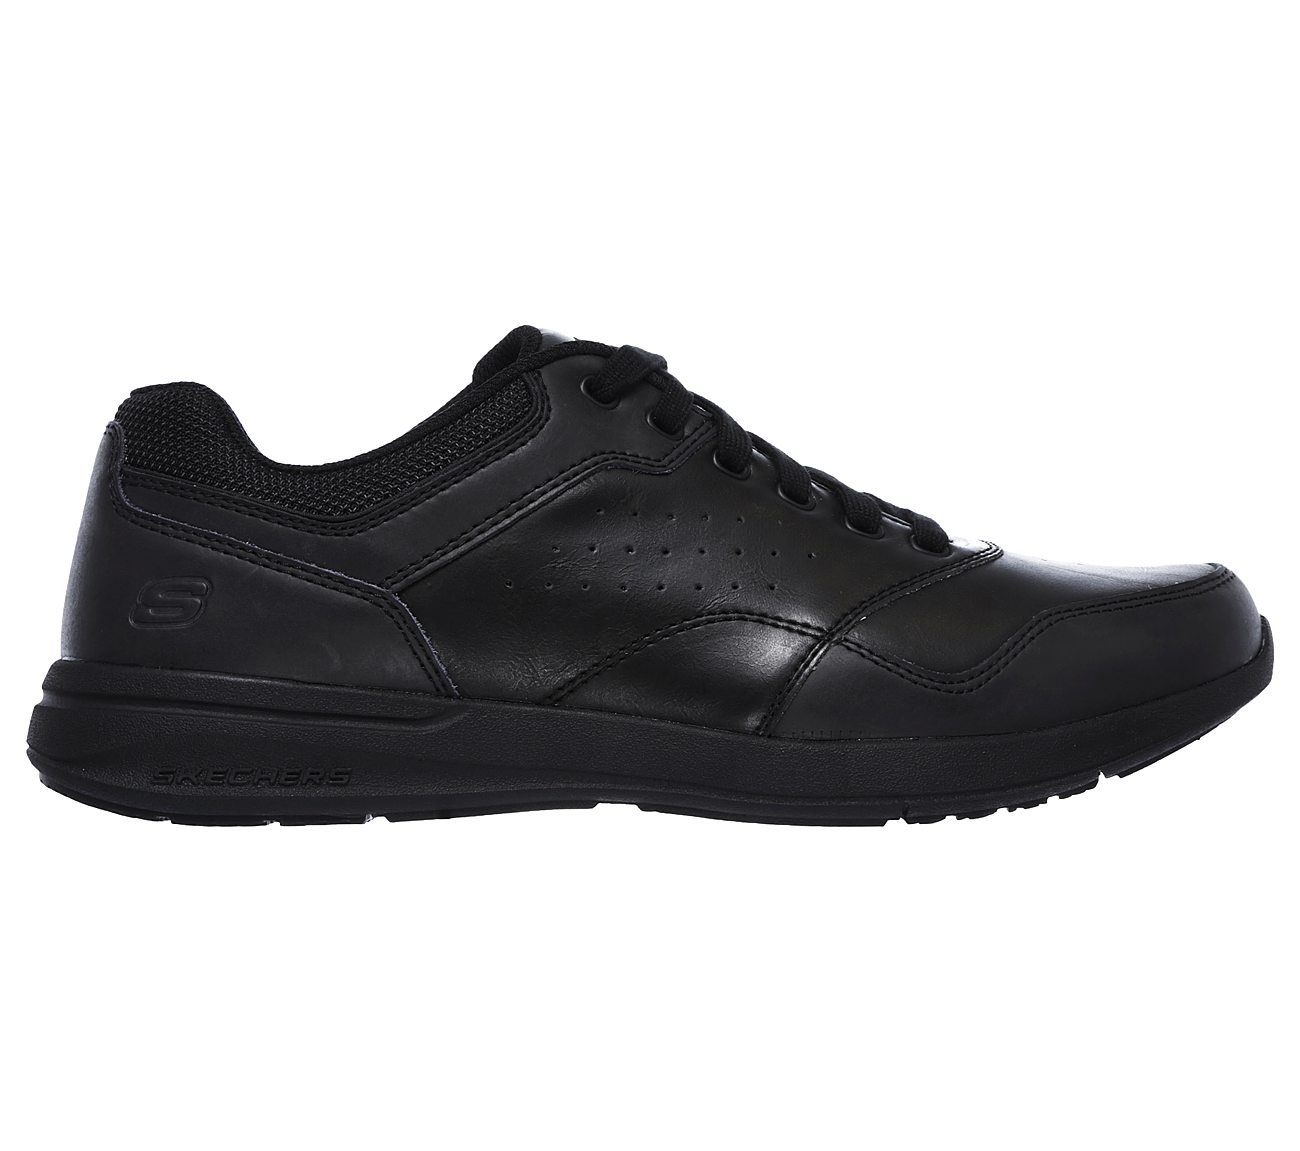 Velago SKECHERS Relaxed Fit Shoes